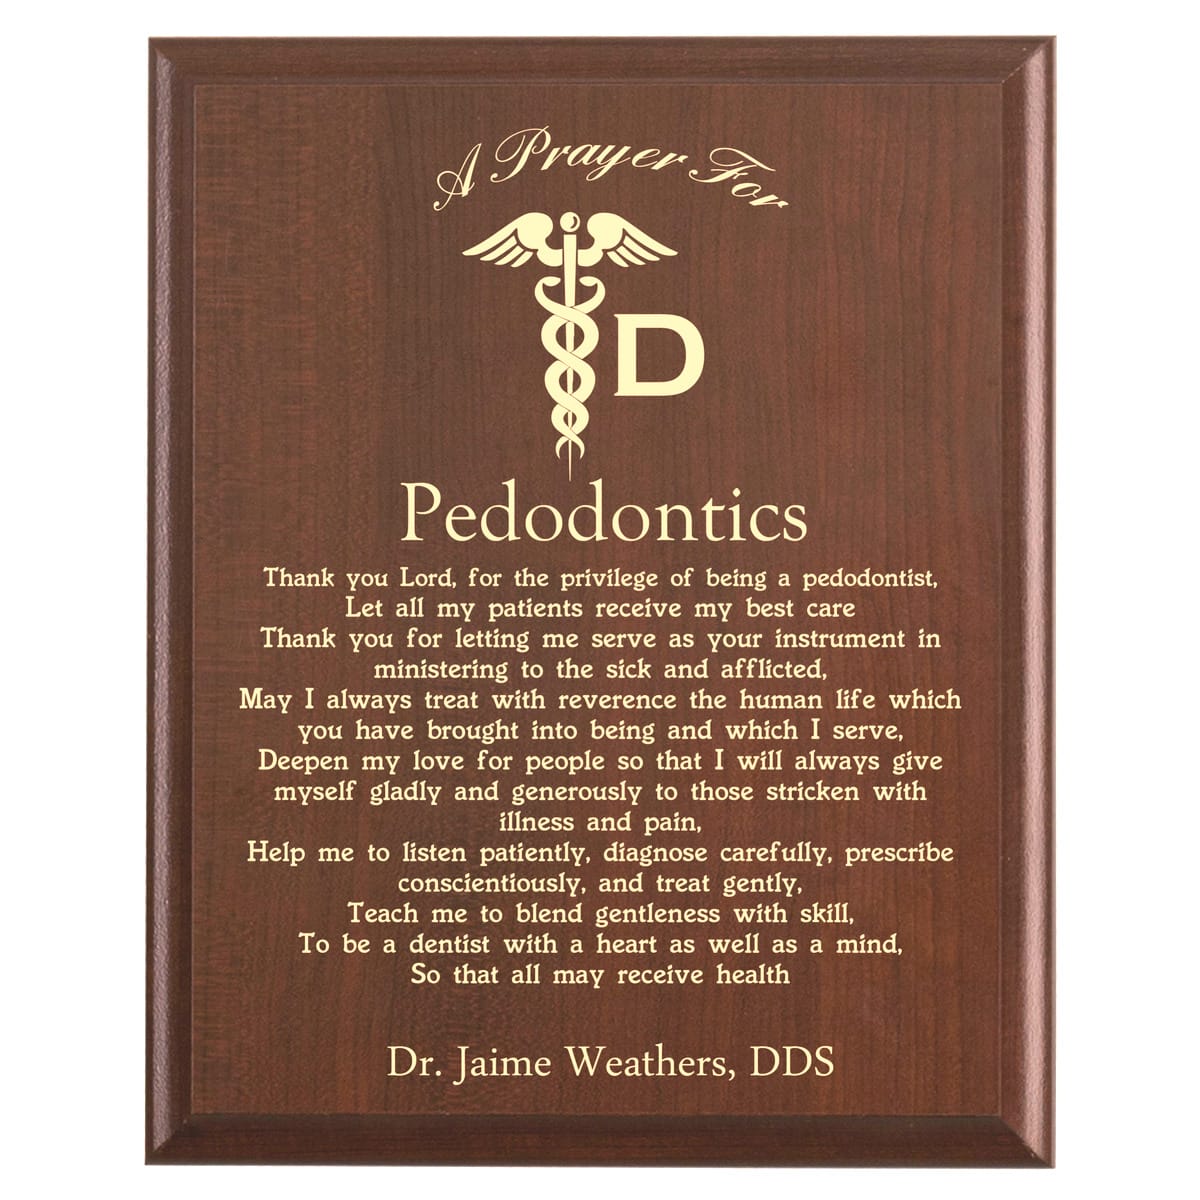 Plaque photo: Pedodontist Prayer Plaque design with free personalization. Wood style finish with customized text.